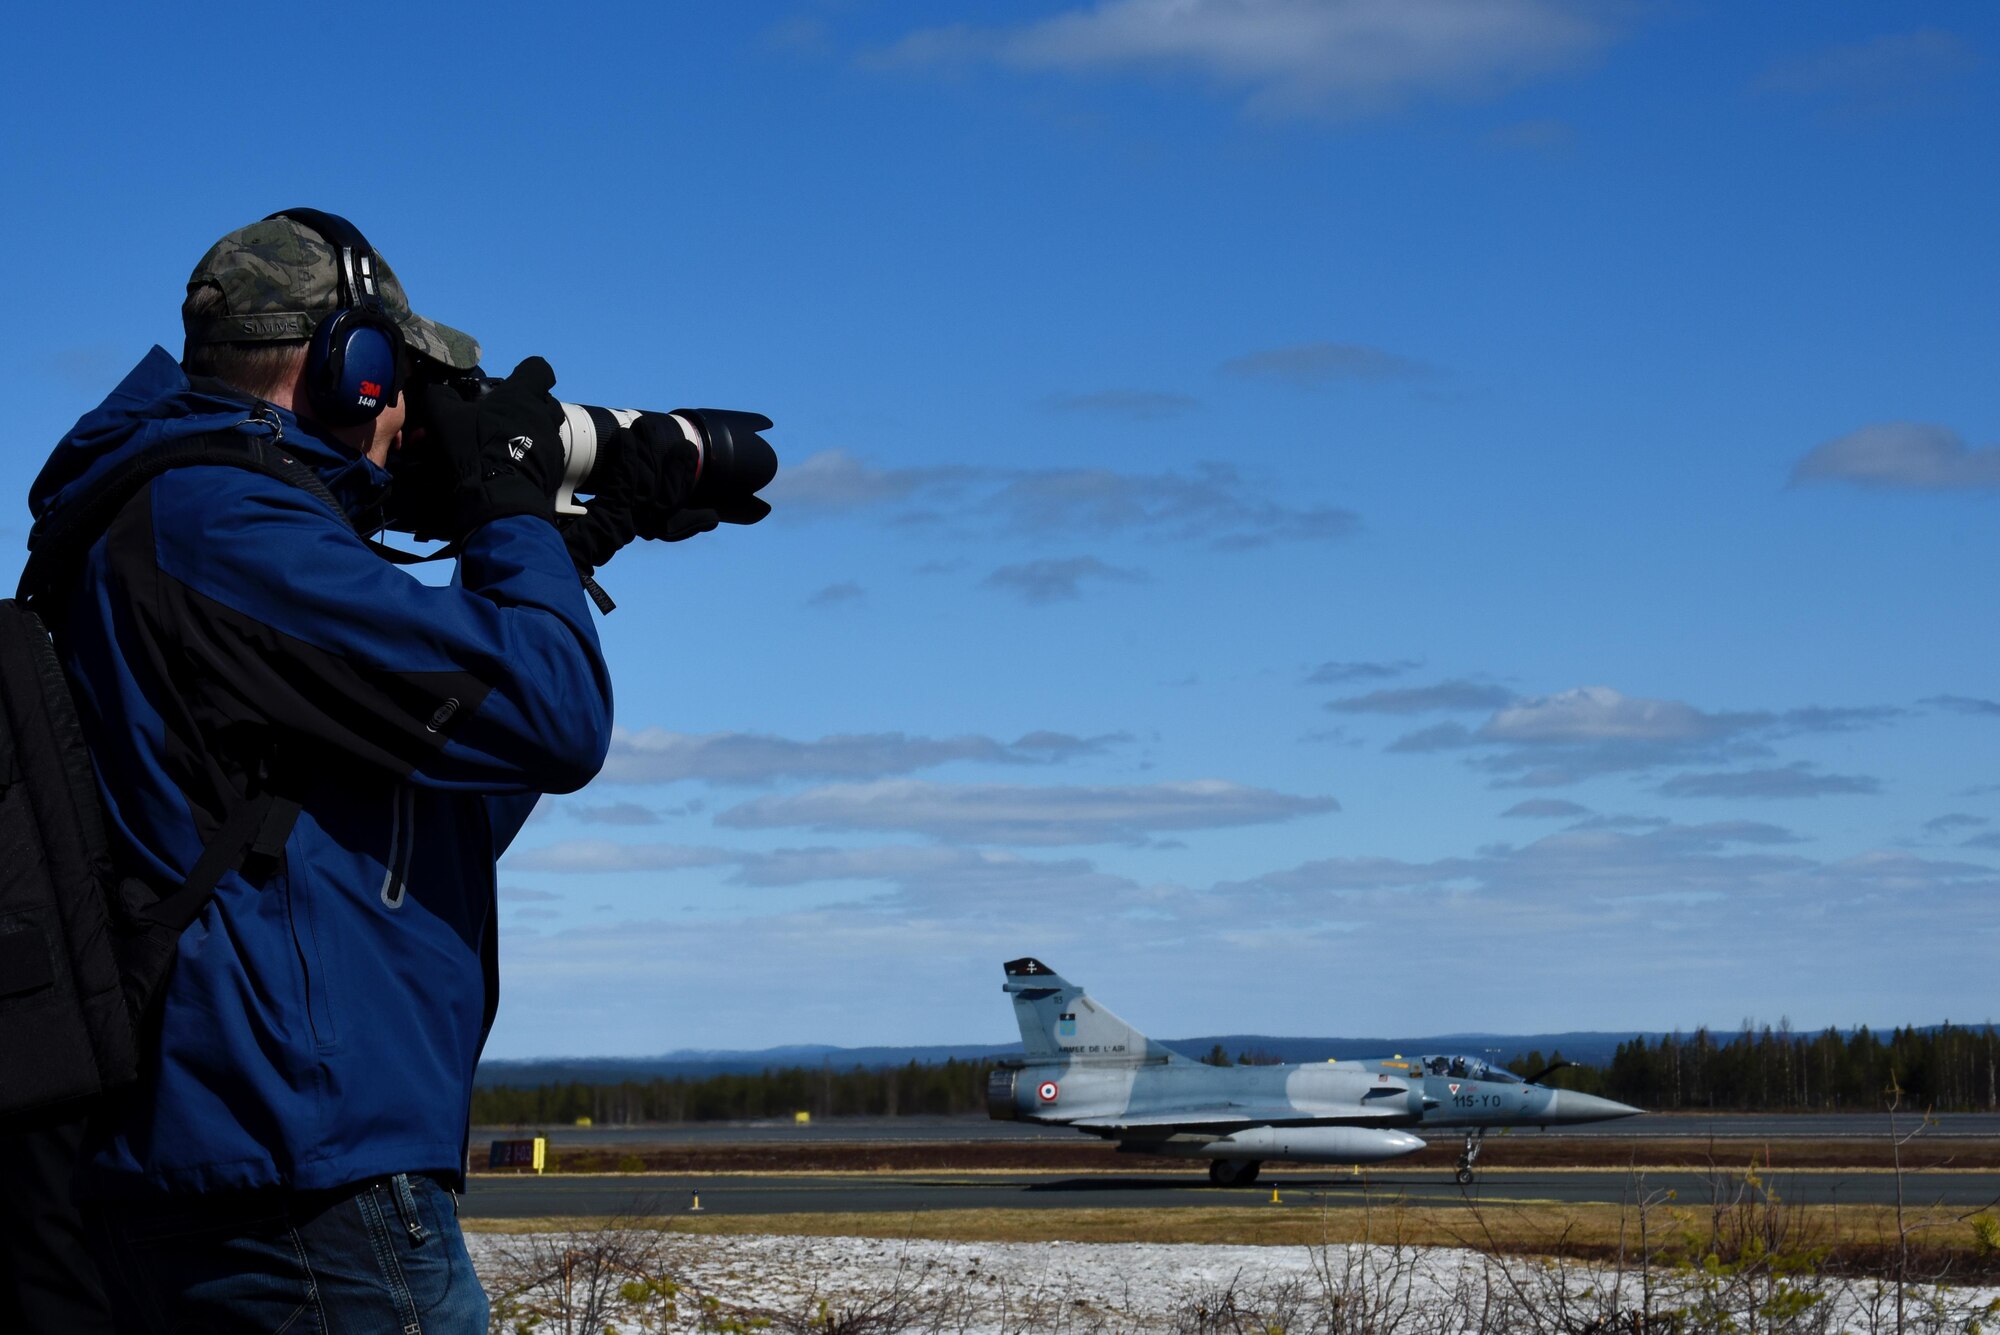 A media representative takes photos of a French Mirage 2000 during the Arctic Challenge 2017 media day at Rovaniemi Air Base, Finland, May 23. Media representatives from multiple nations gathered to learn about the exercise, which is aimed at developing a strong relationship between participating militaries. (U.S. Air Force photo/Airman 1st Class Abby L. Finkel)